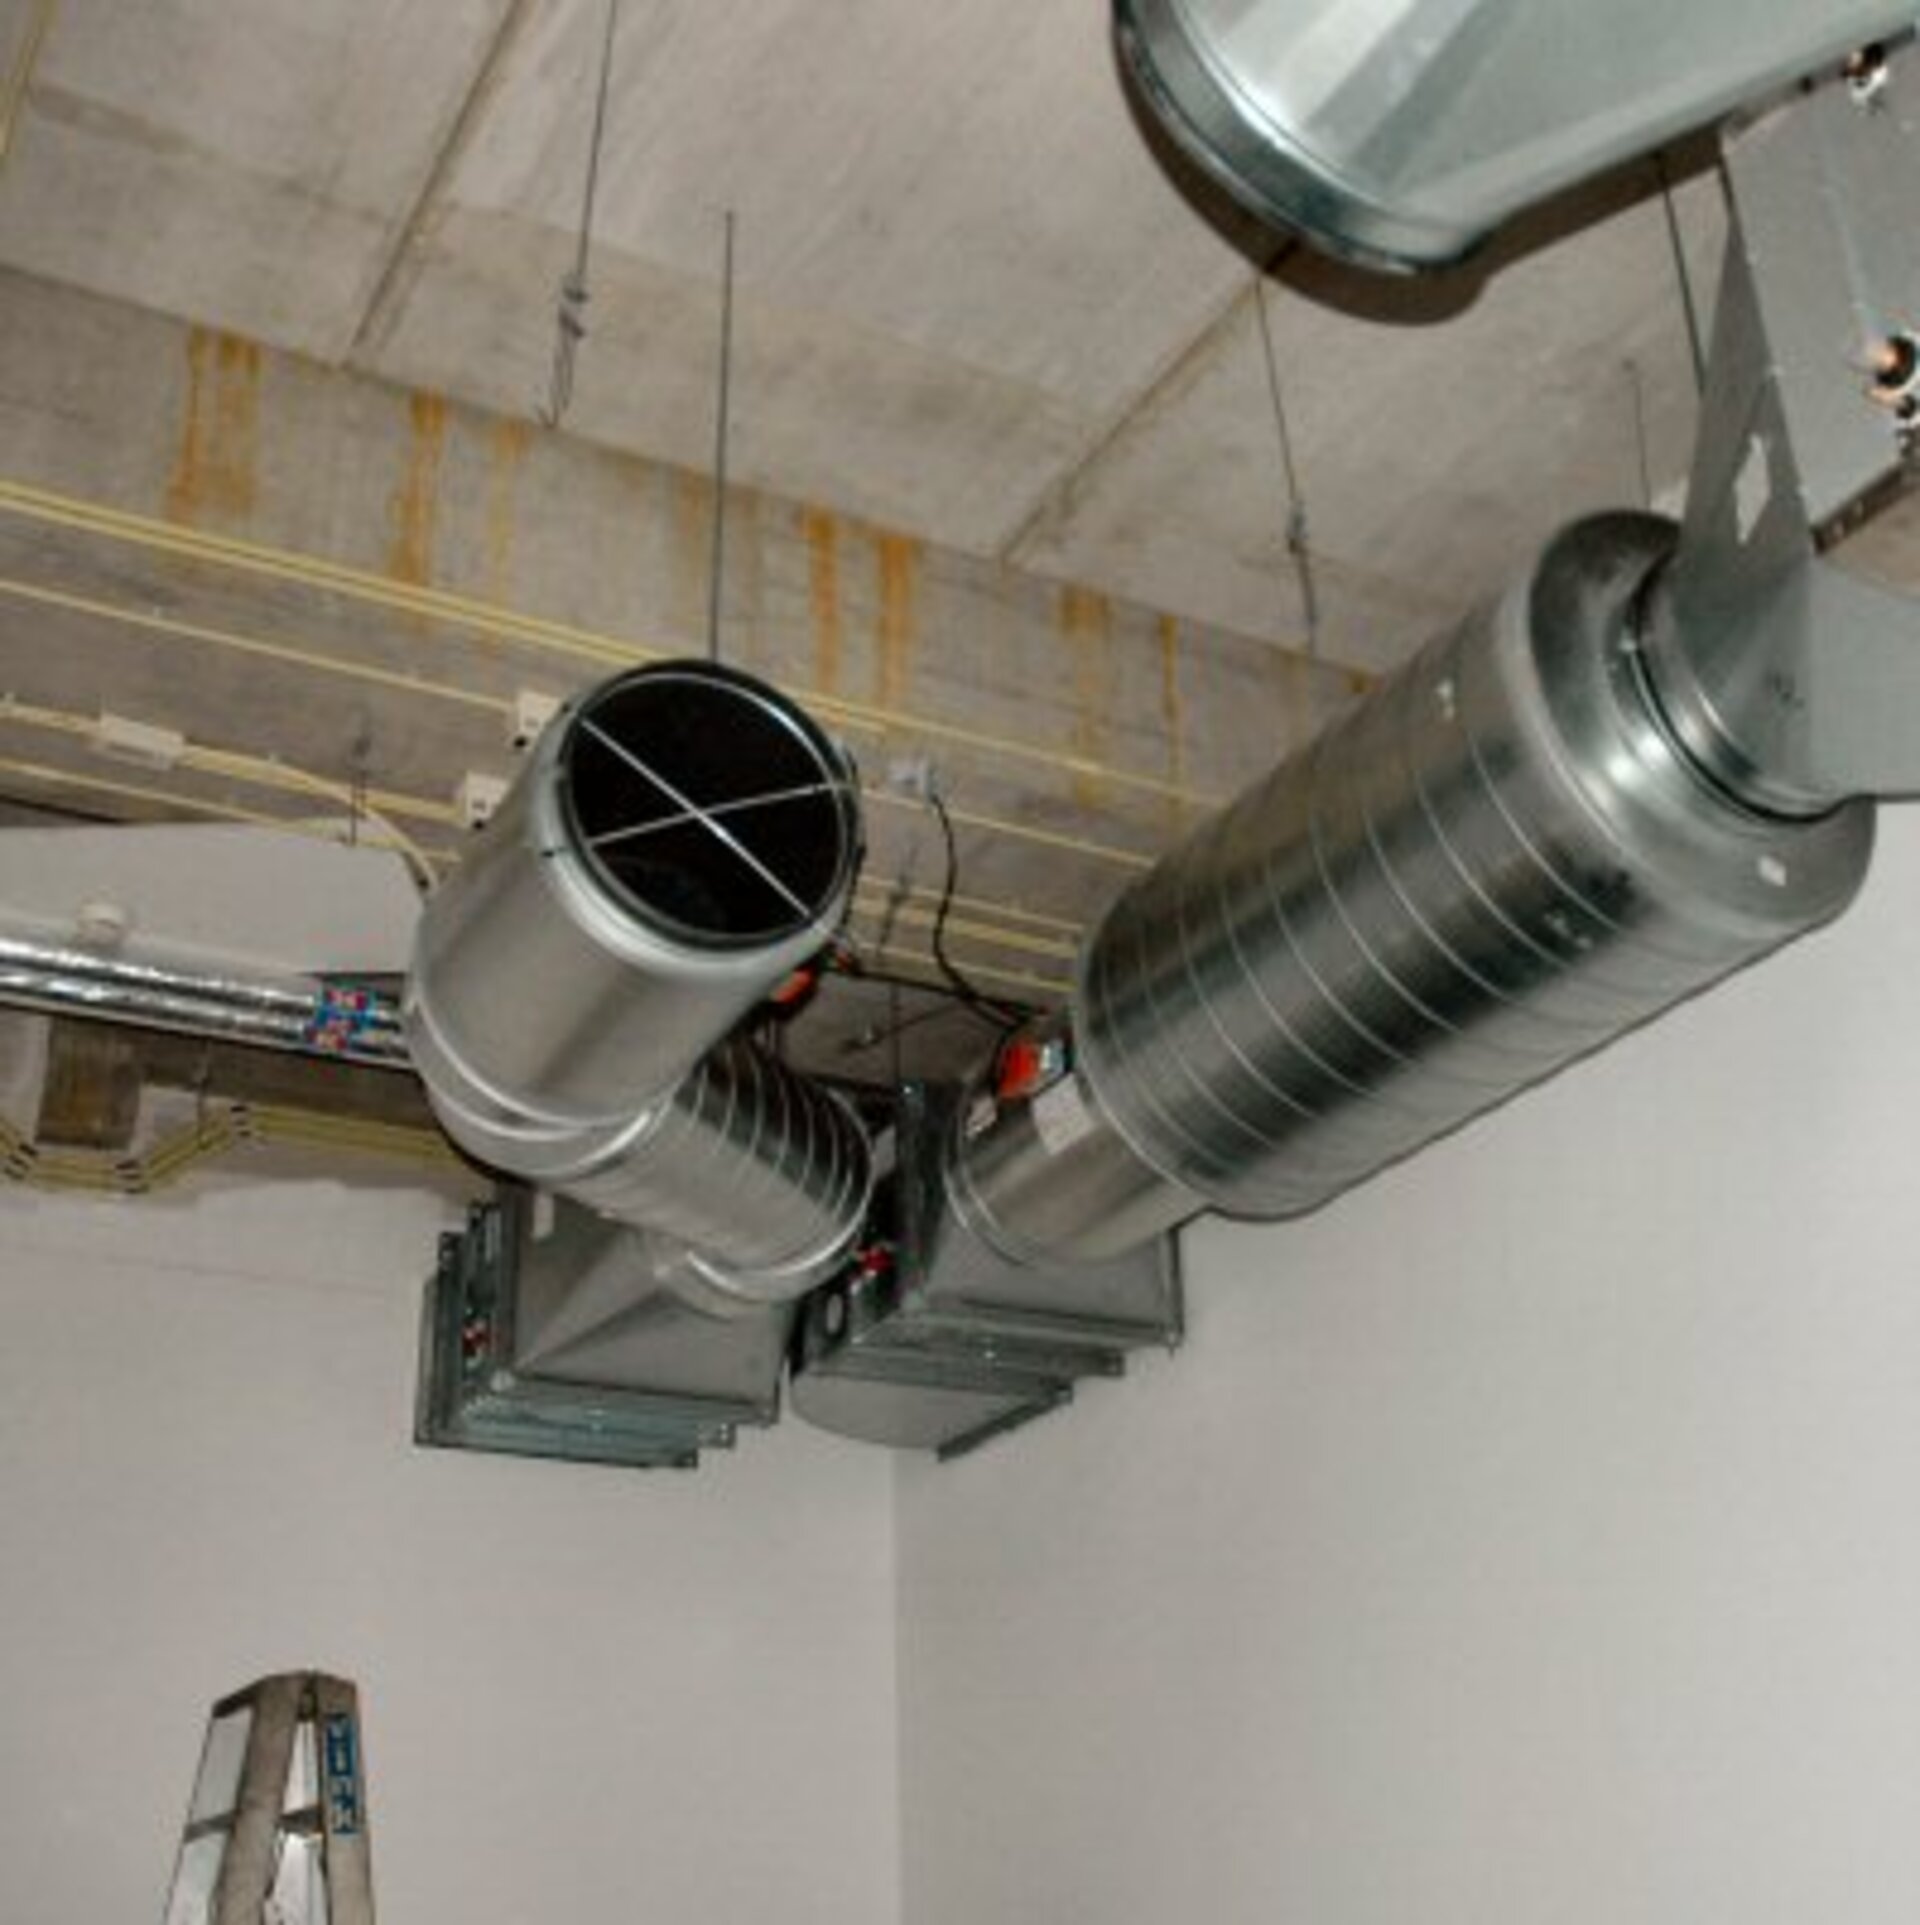 The air conditioning extension to take the excess heat from the projectors